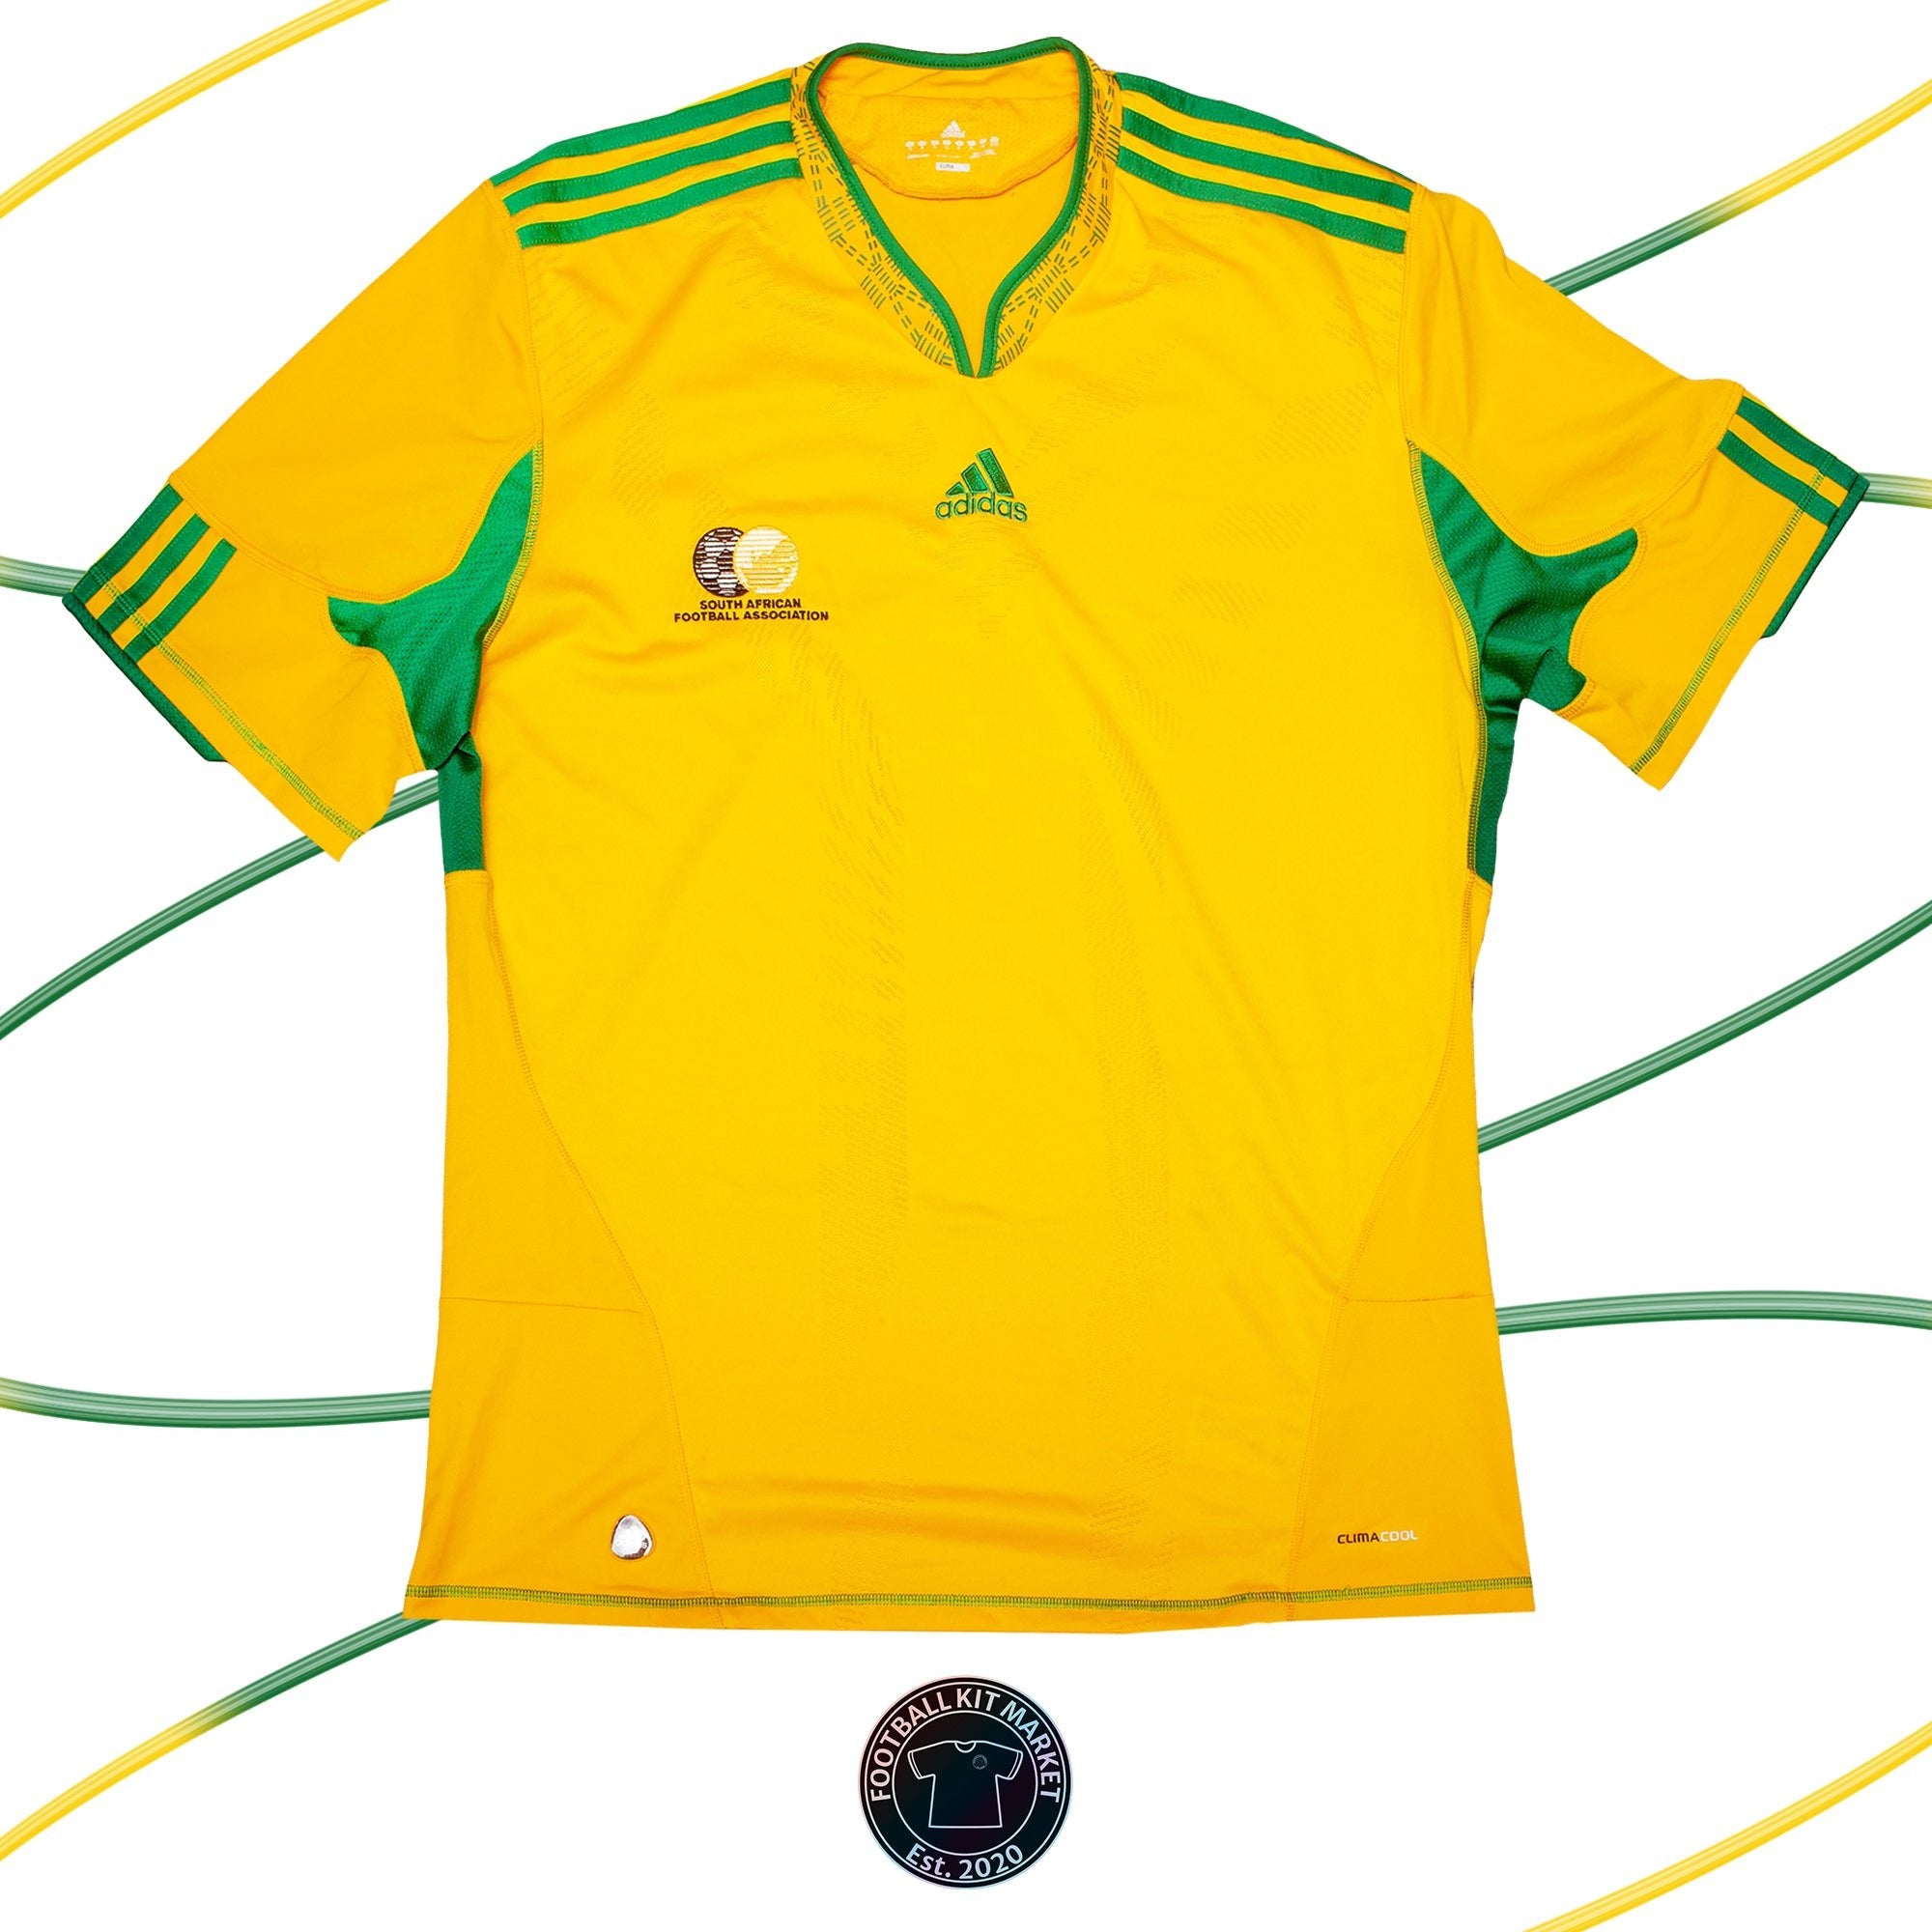 Genuine SOUTH AFRICA Home Shirt (2010-2011) - ADIDAS (XL) - Product Image from Football Kit Market